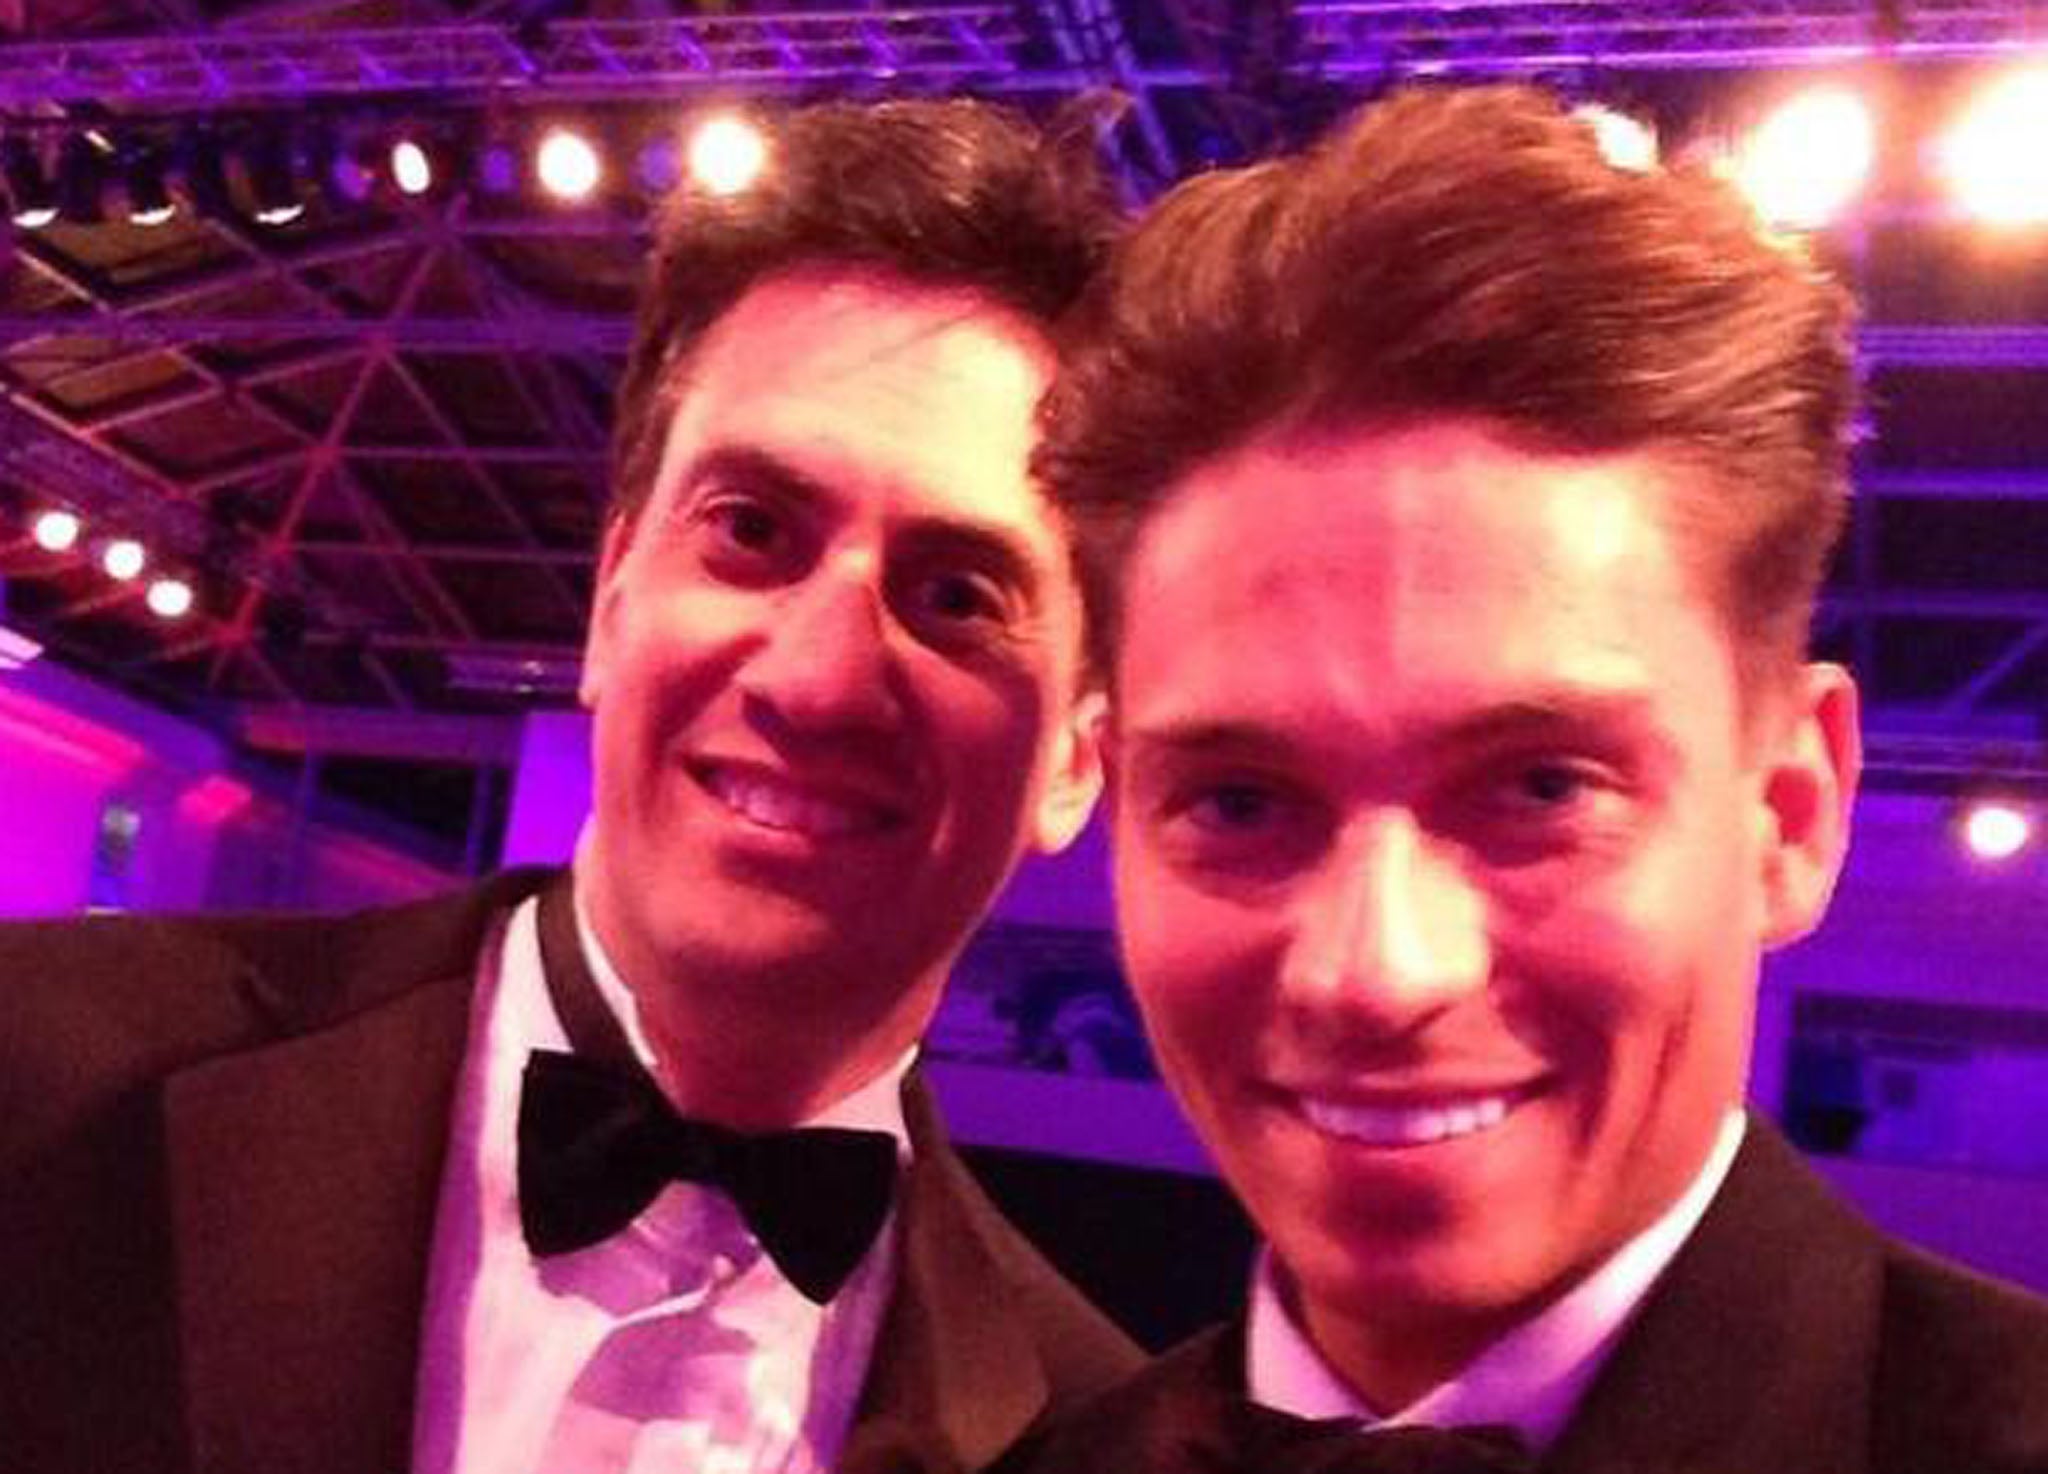 The leader of the Labour party posed with ‘salty potato’ fan Joey Essex for a bizarre ‘selfie’ at the Sun's Military Awards in London